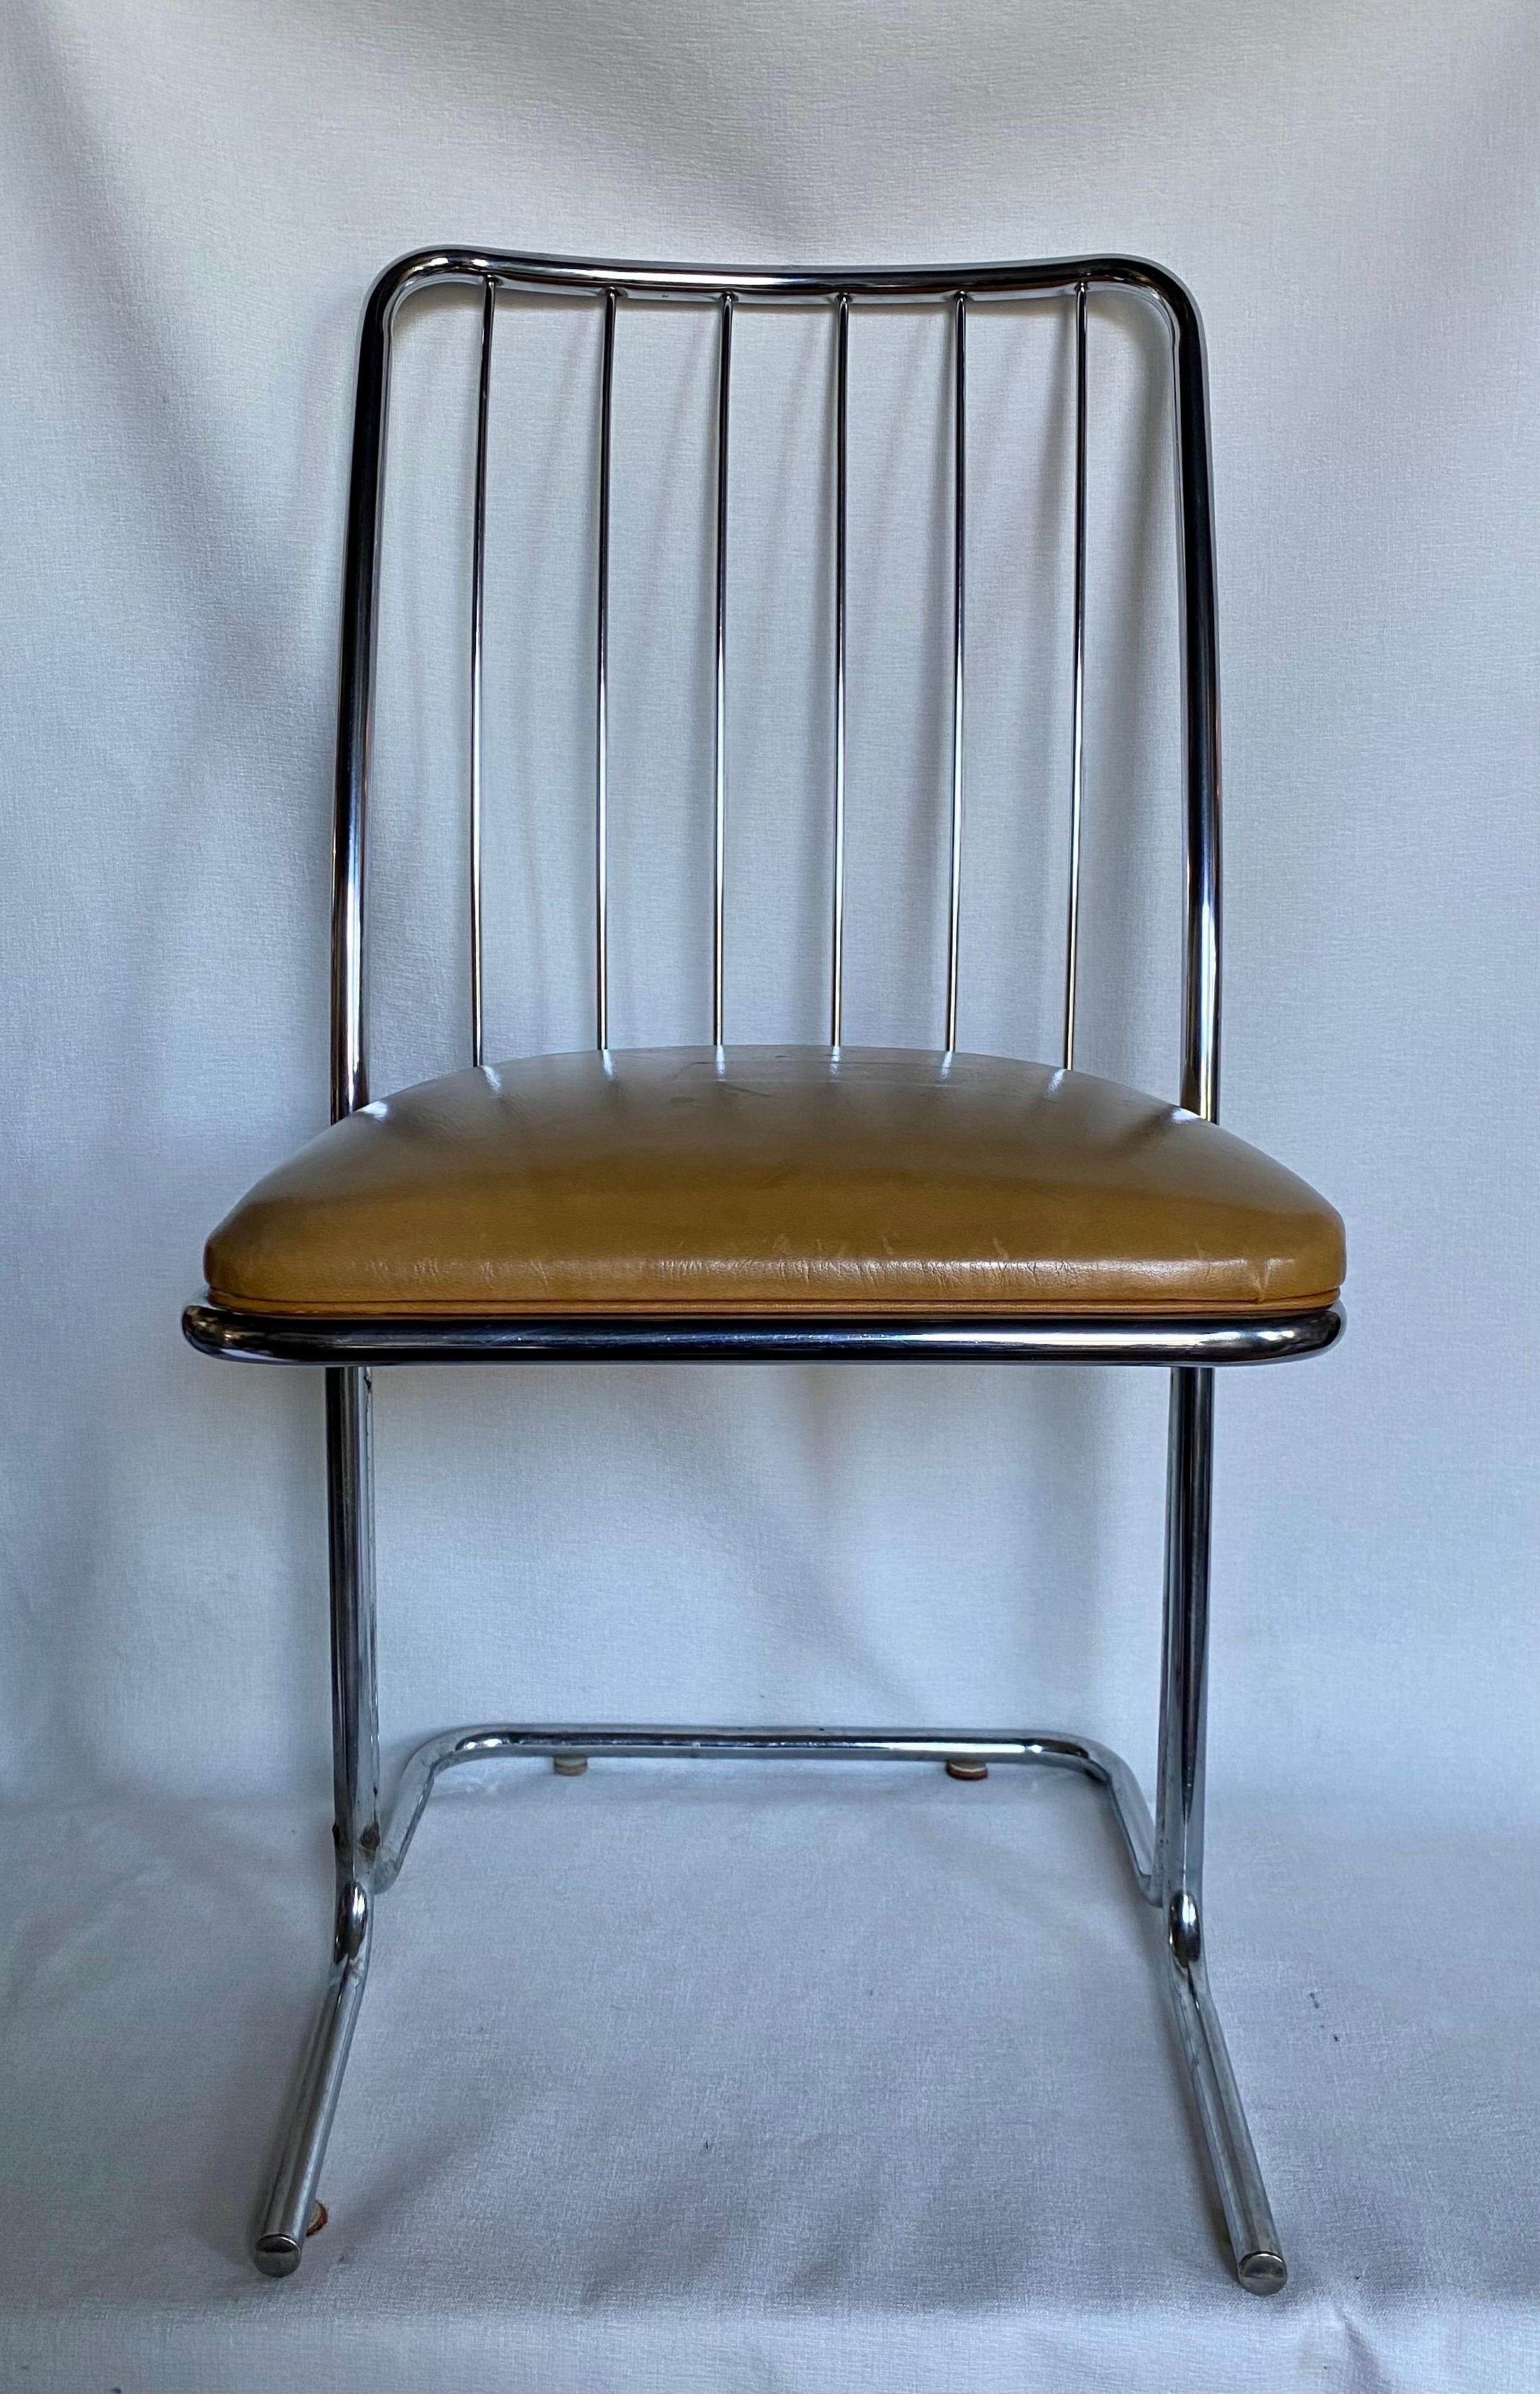 Set of six Mid-Century Modern chrome dining side chairs featuring a cantilevered tubular metal frame and a wire back design. These sculptural armless dining chairs are manufactured by Daystrom Furniture. Original vinyl upholstery. Chairs dated